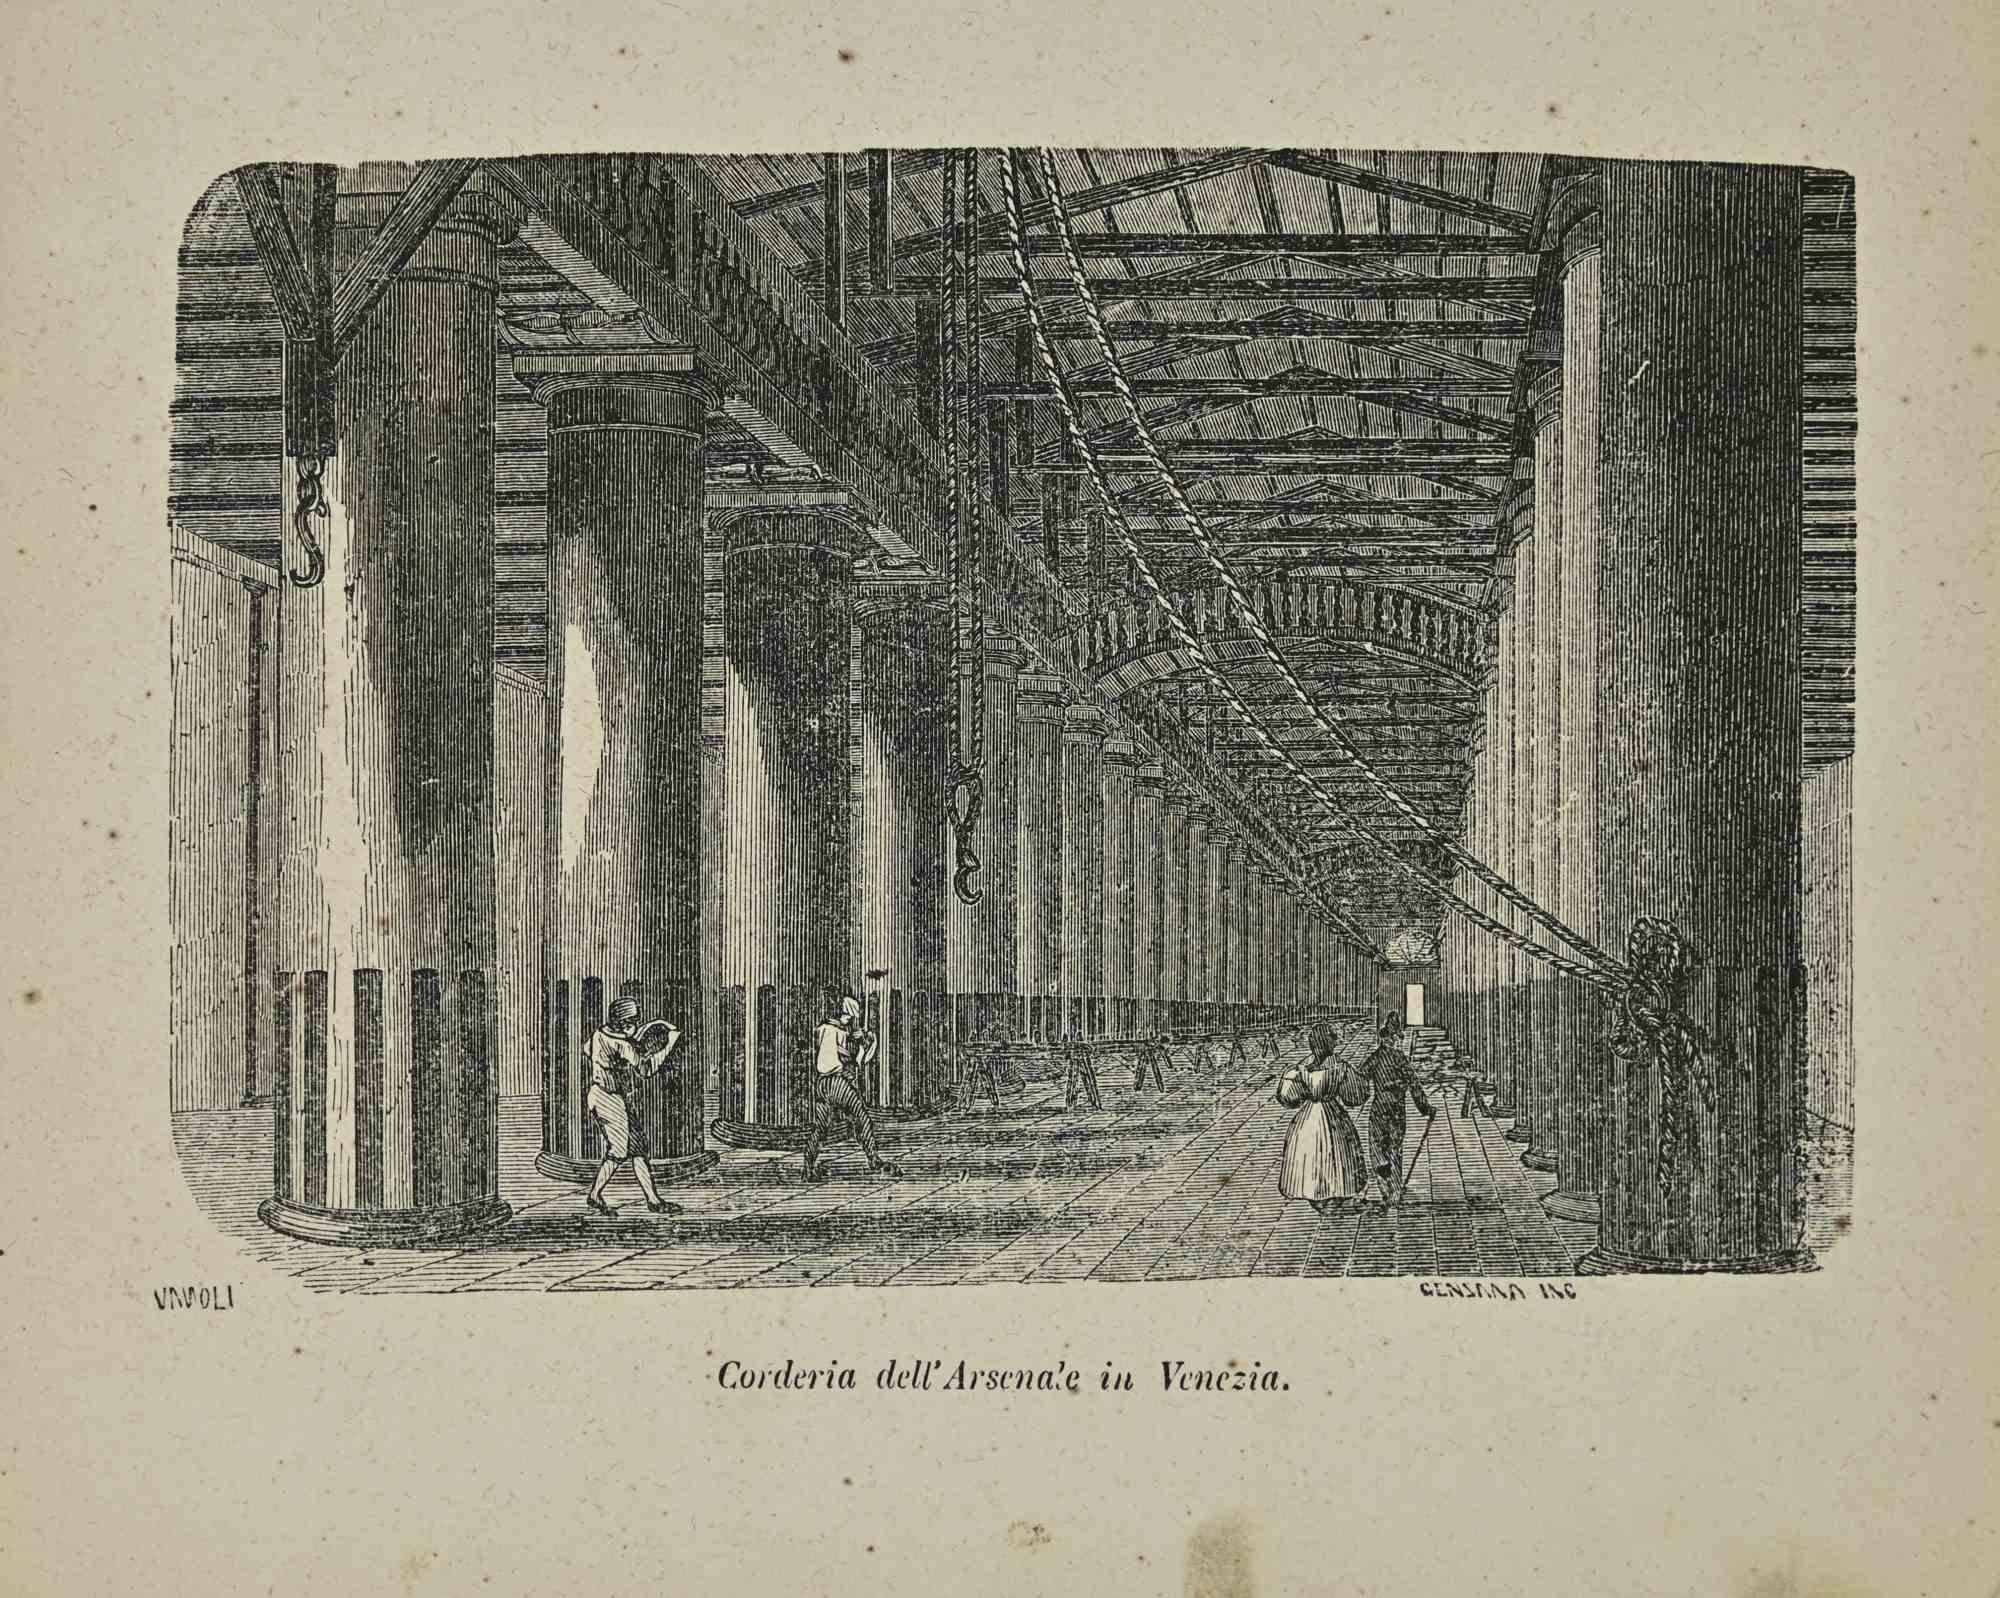 Various Artists Figurative Print - View of Corderia dell'Arsenale in Venice - Lithograph - 1862